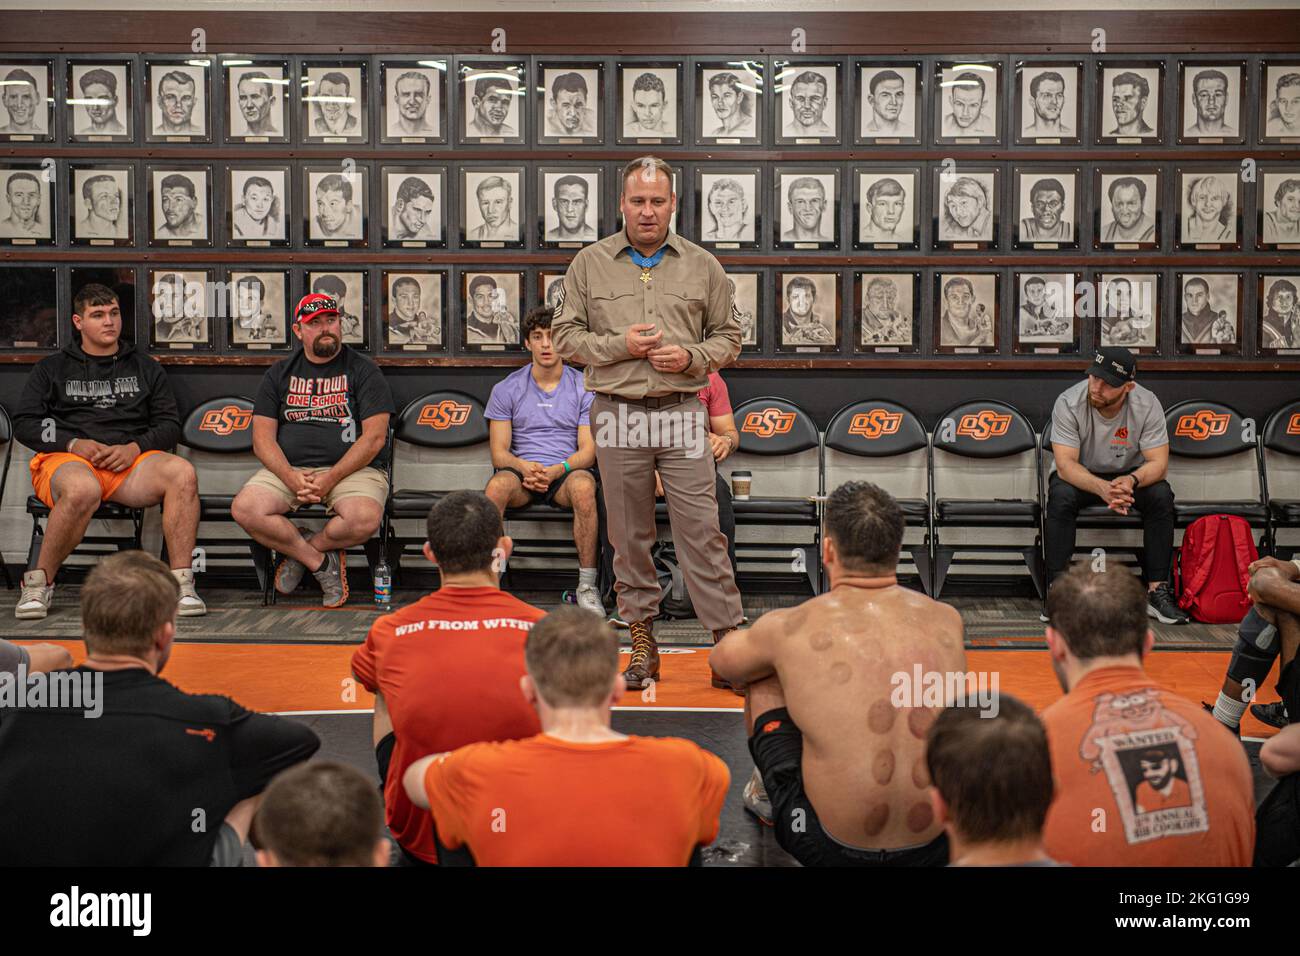 Master Sgt. Earl Plumlee, a Medal of Honor recipient, speaks to members of the Oklahoma State University wrestling team in Stillwater, Oklahoma, Oct. 22, 2022. Plumlee, a native Oklahoman, toured his home state Oct. 18-22. During his visit, Plumlee met with several groups and shared his experiences with them. (Oklahoma National Guard photo by Sgt. Anthony Jones) Stock Photo